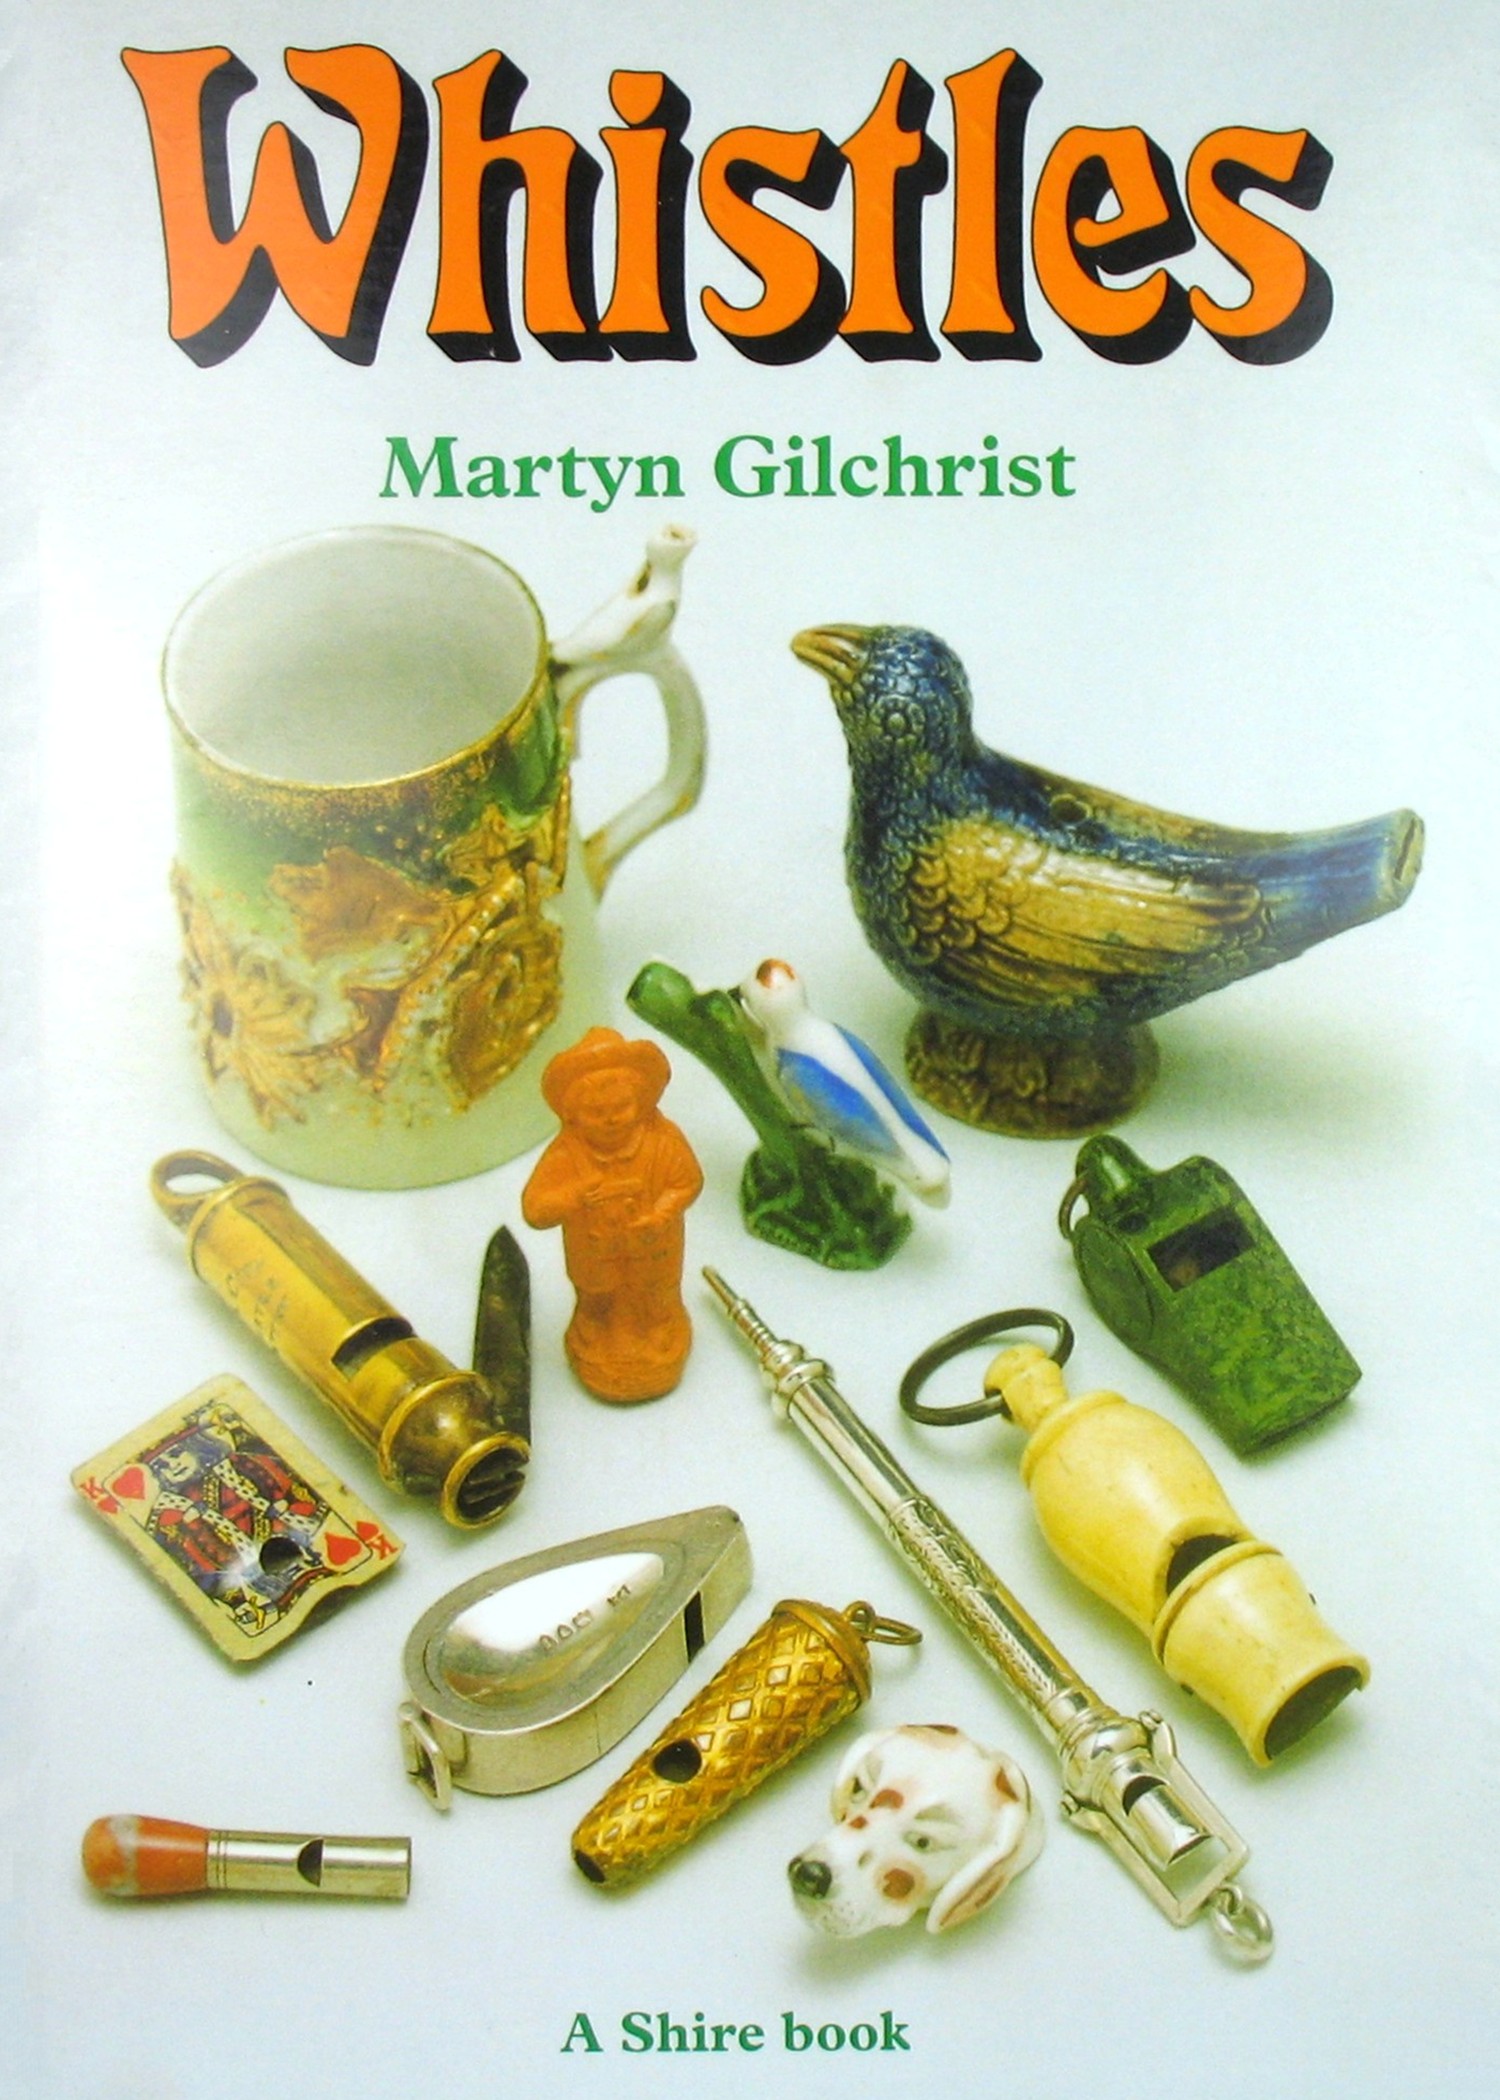 Whistles by Martyn Gilchrist